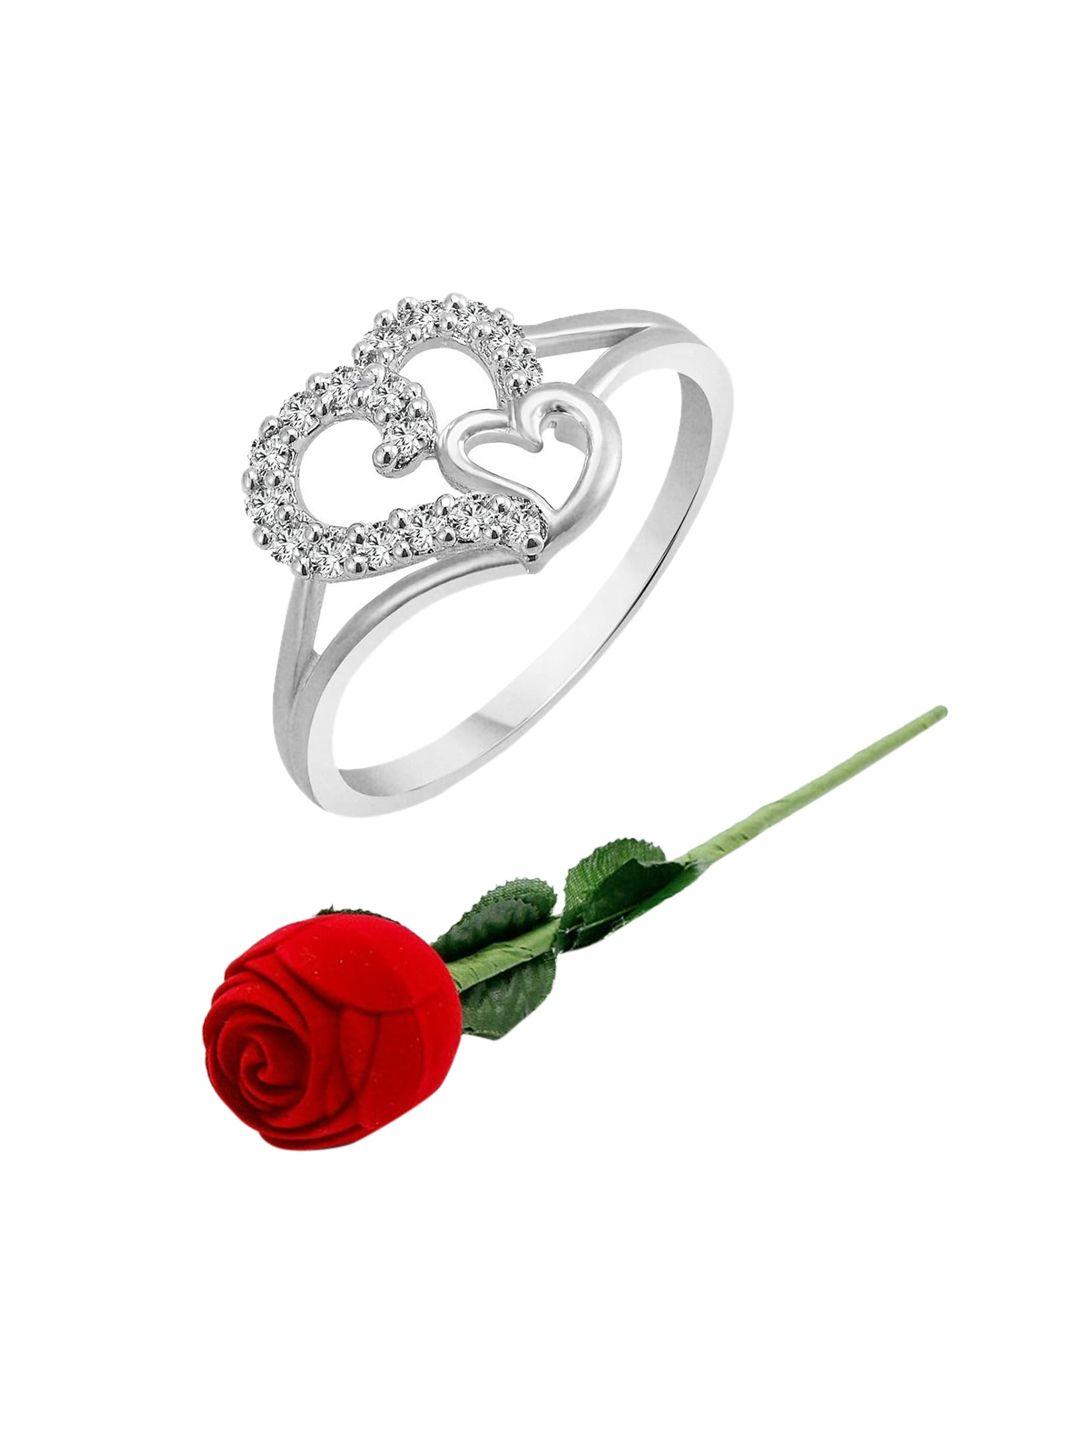 vighnaharta rhodium-plated cz-stone studded heart design finger ring with rose box